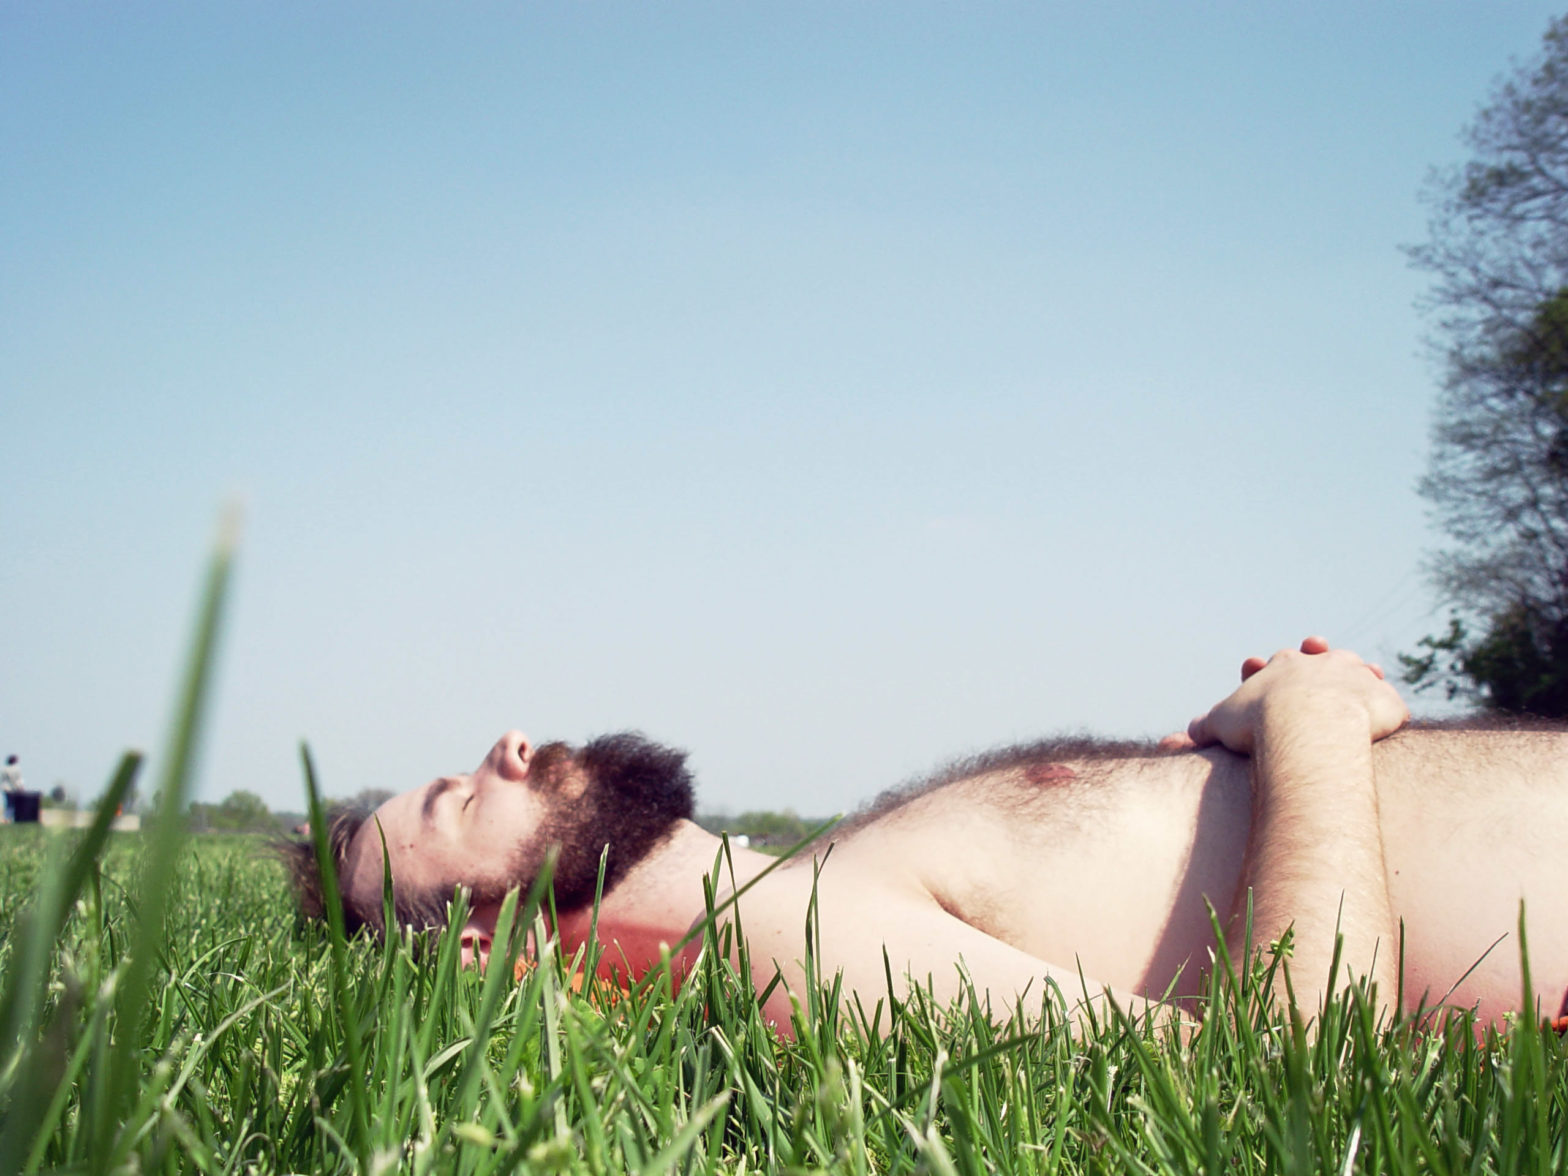 A pale bearded man lies in the grass with his eyes closed